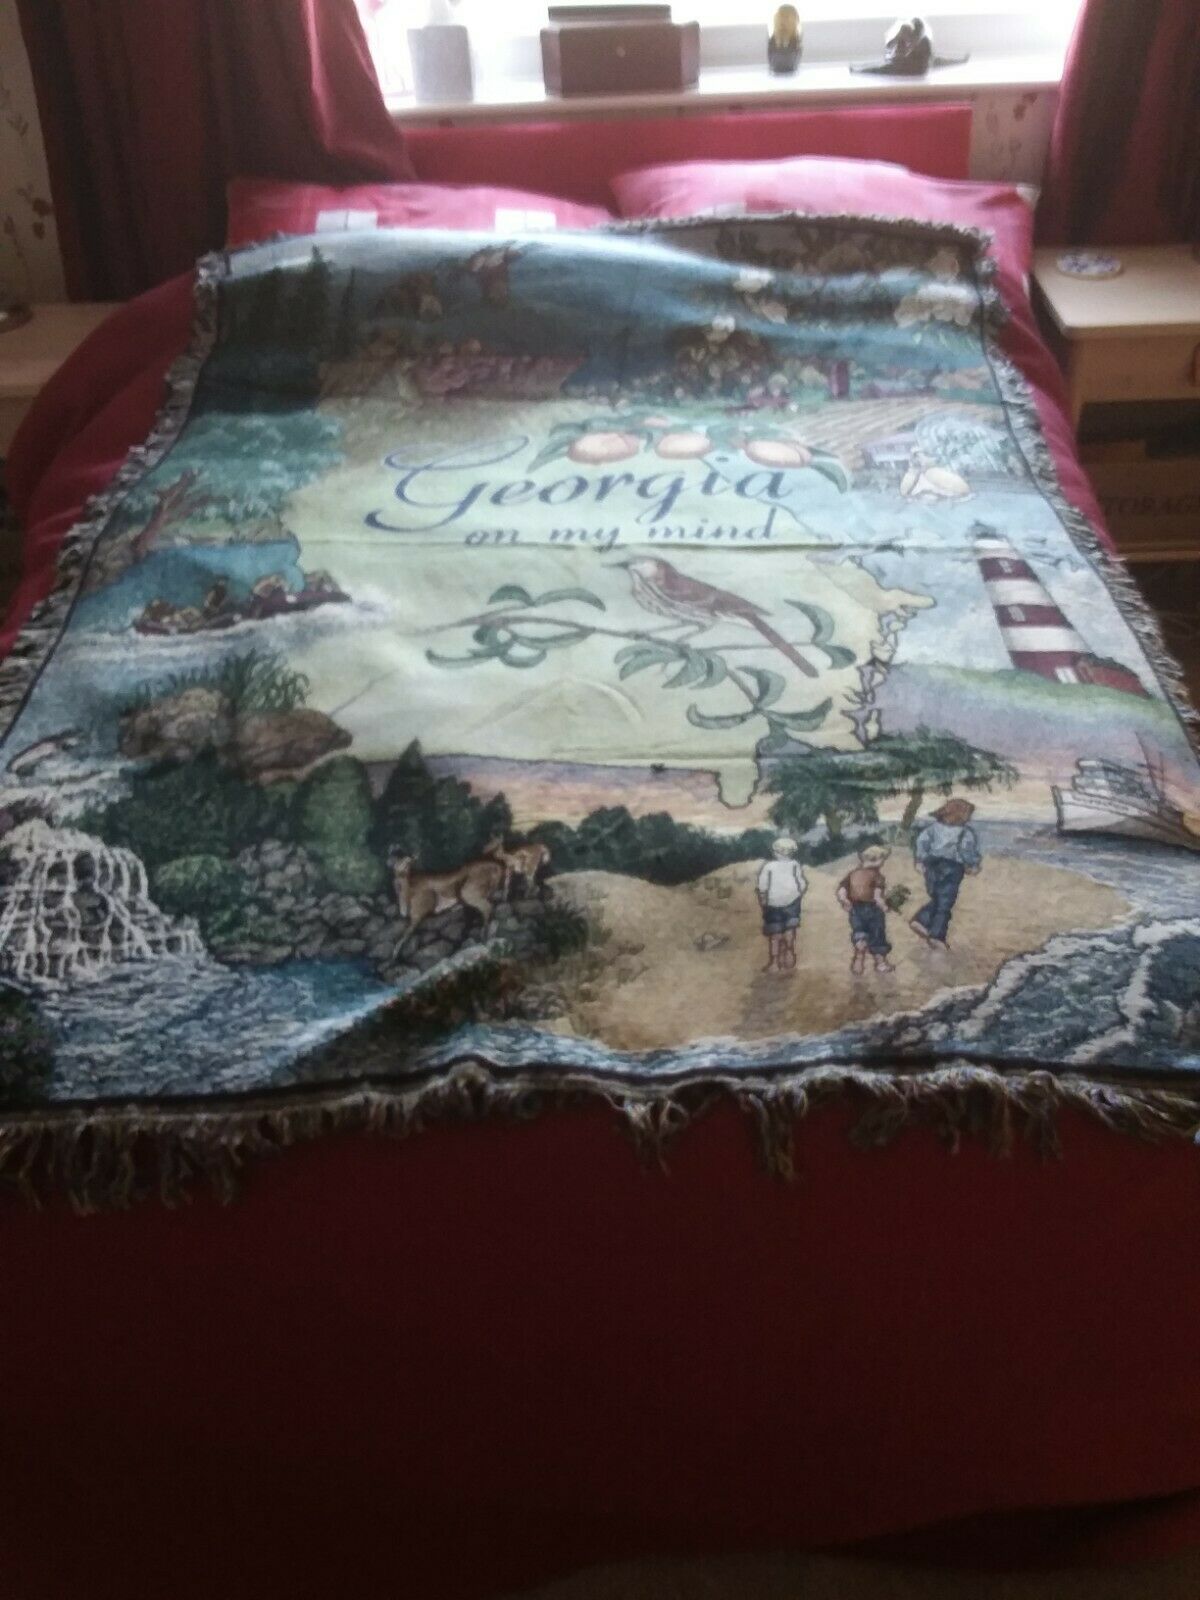 GEORGIA ON MY MIND TAPESTRY SOFA/BED THROW 6FT6" X4 FT APPROX